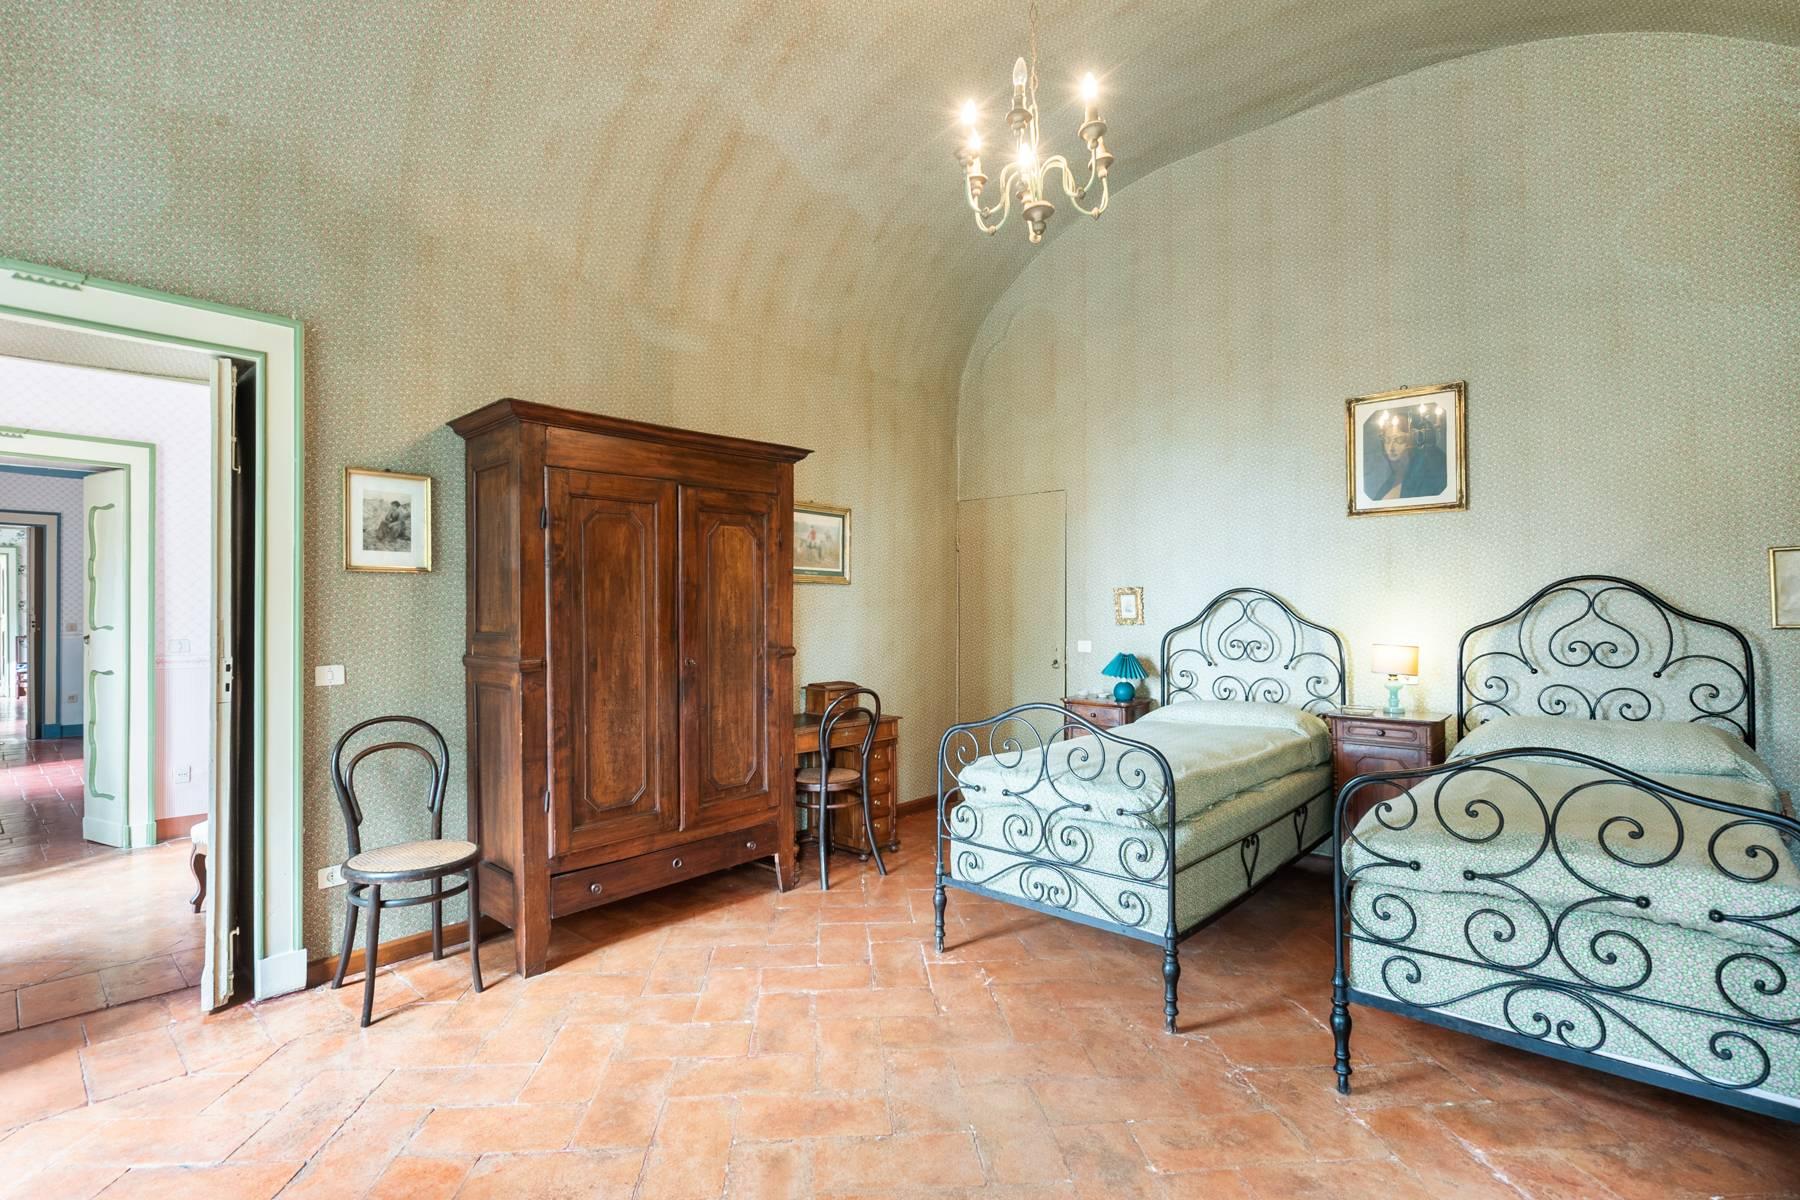 Historic charming residence in the Alessandria region - 17